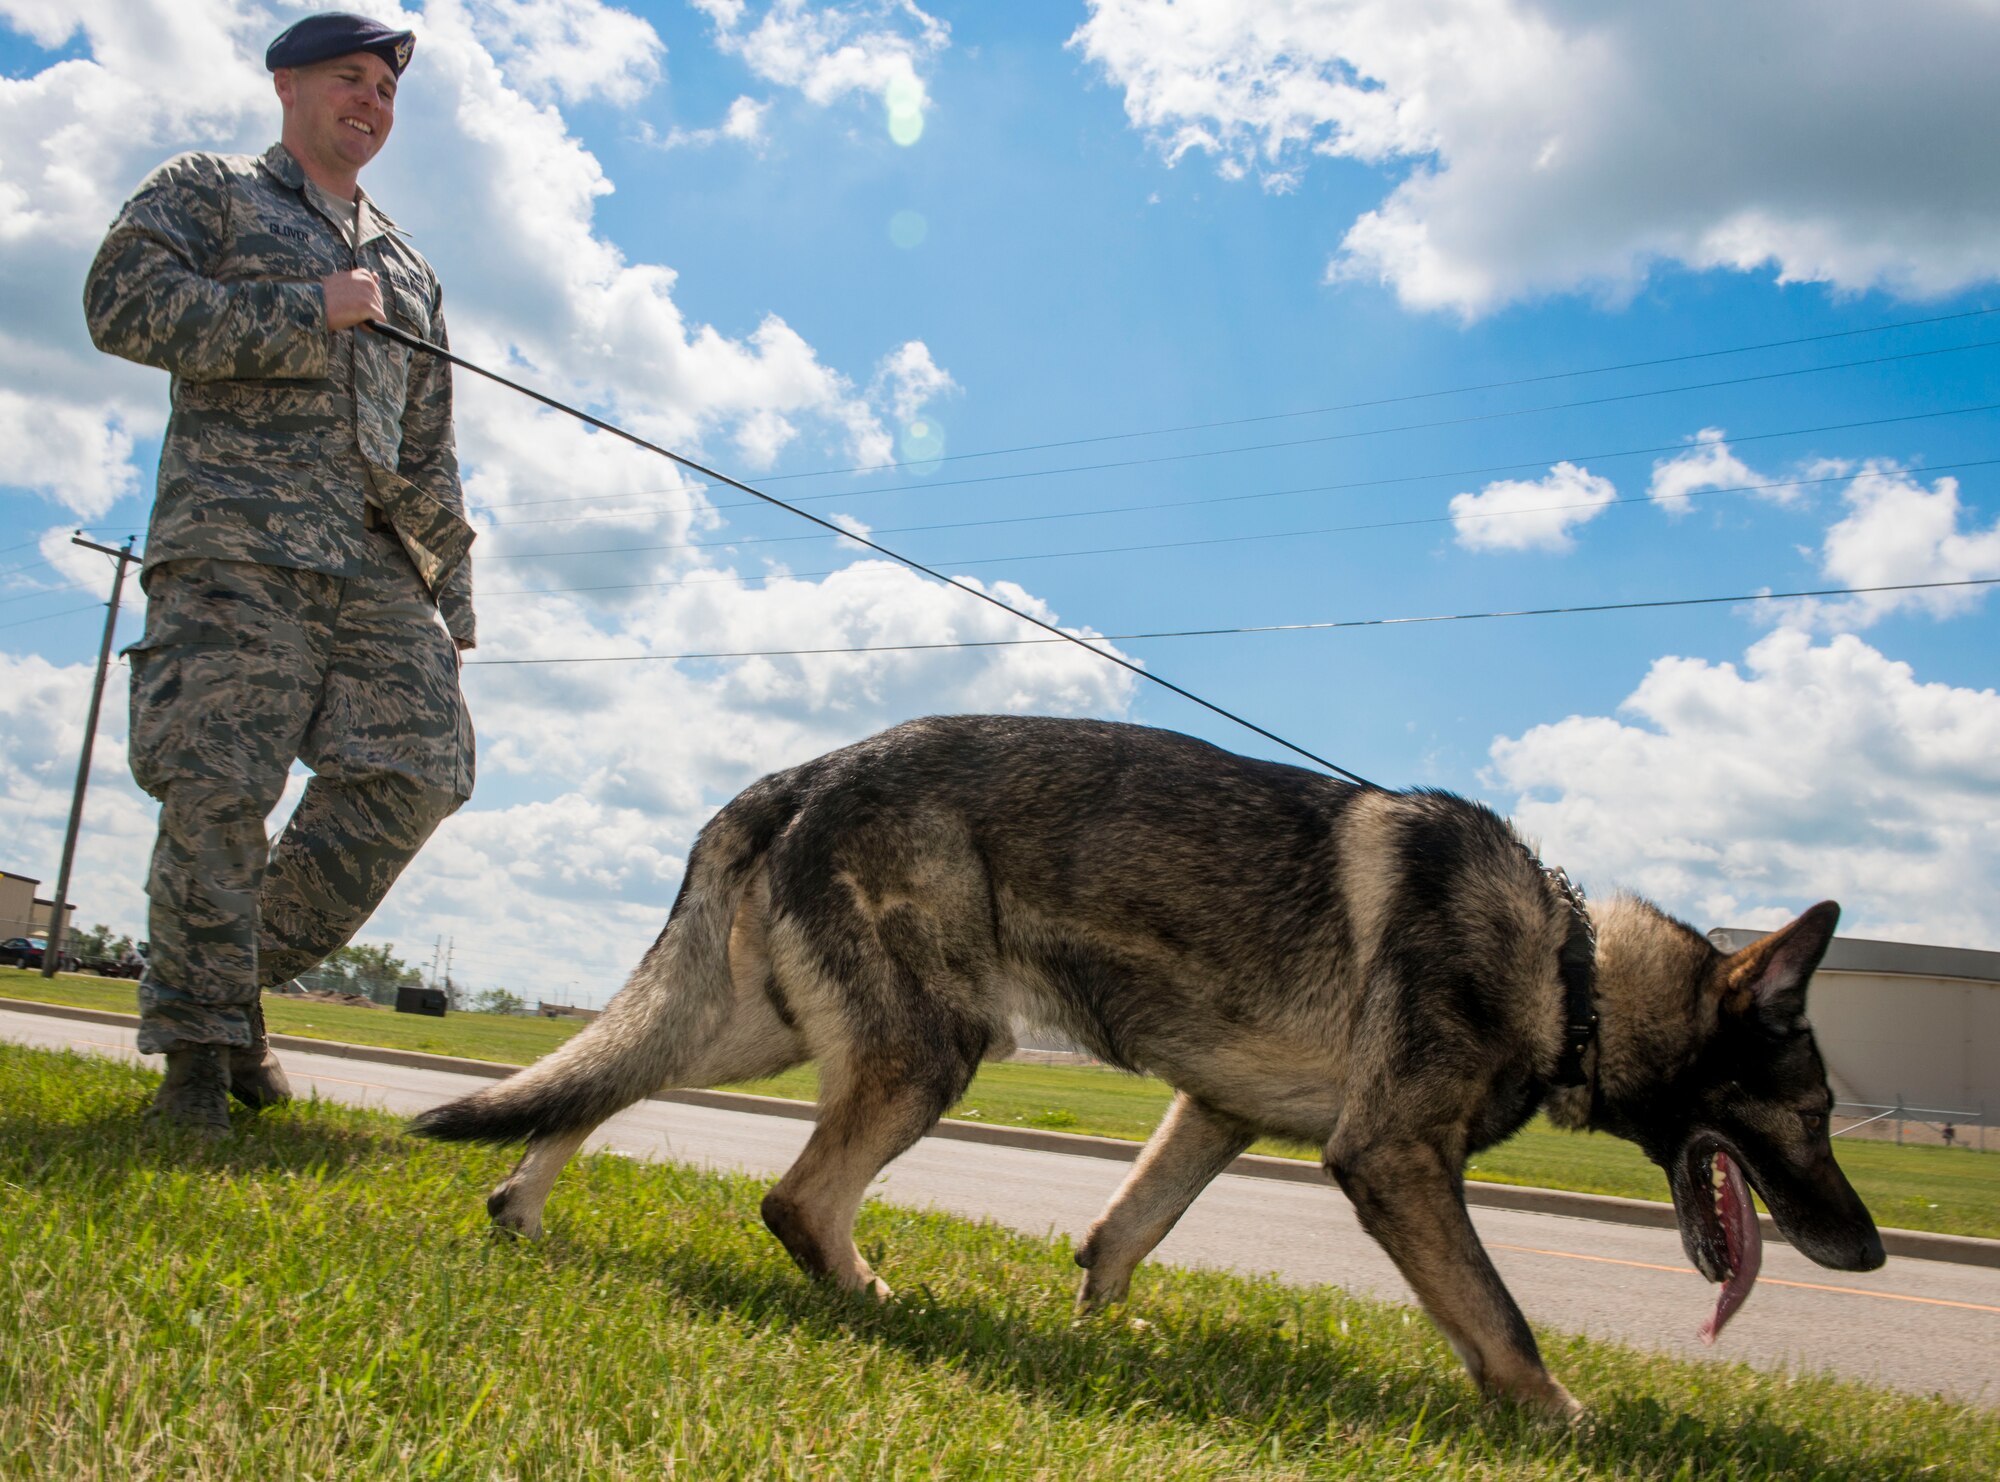 Staff Sgt. Tim Glover, 5th Security Forces Squadron military working dog handler, goes for a walk with his MWD Roko on Minot Air Force Base, N.D., July 28, 2014. Glover decided to become a handler after he observed handlers and their dogs working at his last base. (U.S. Air Force photo/Senior Airman Stephanie Morris)